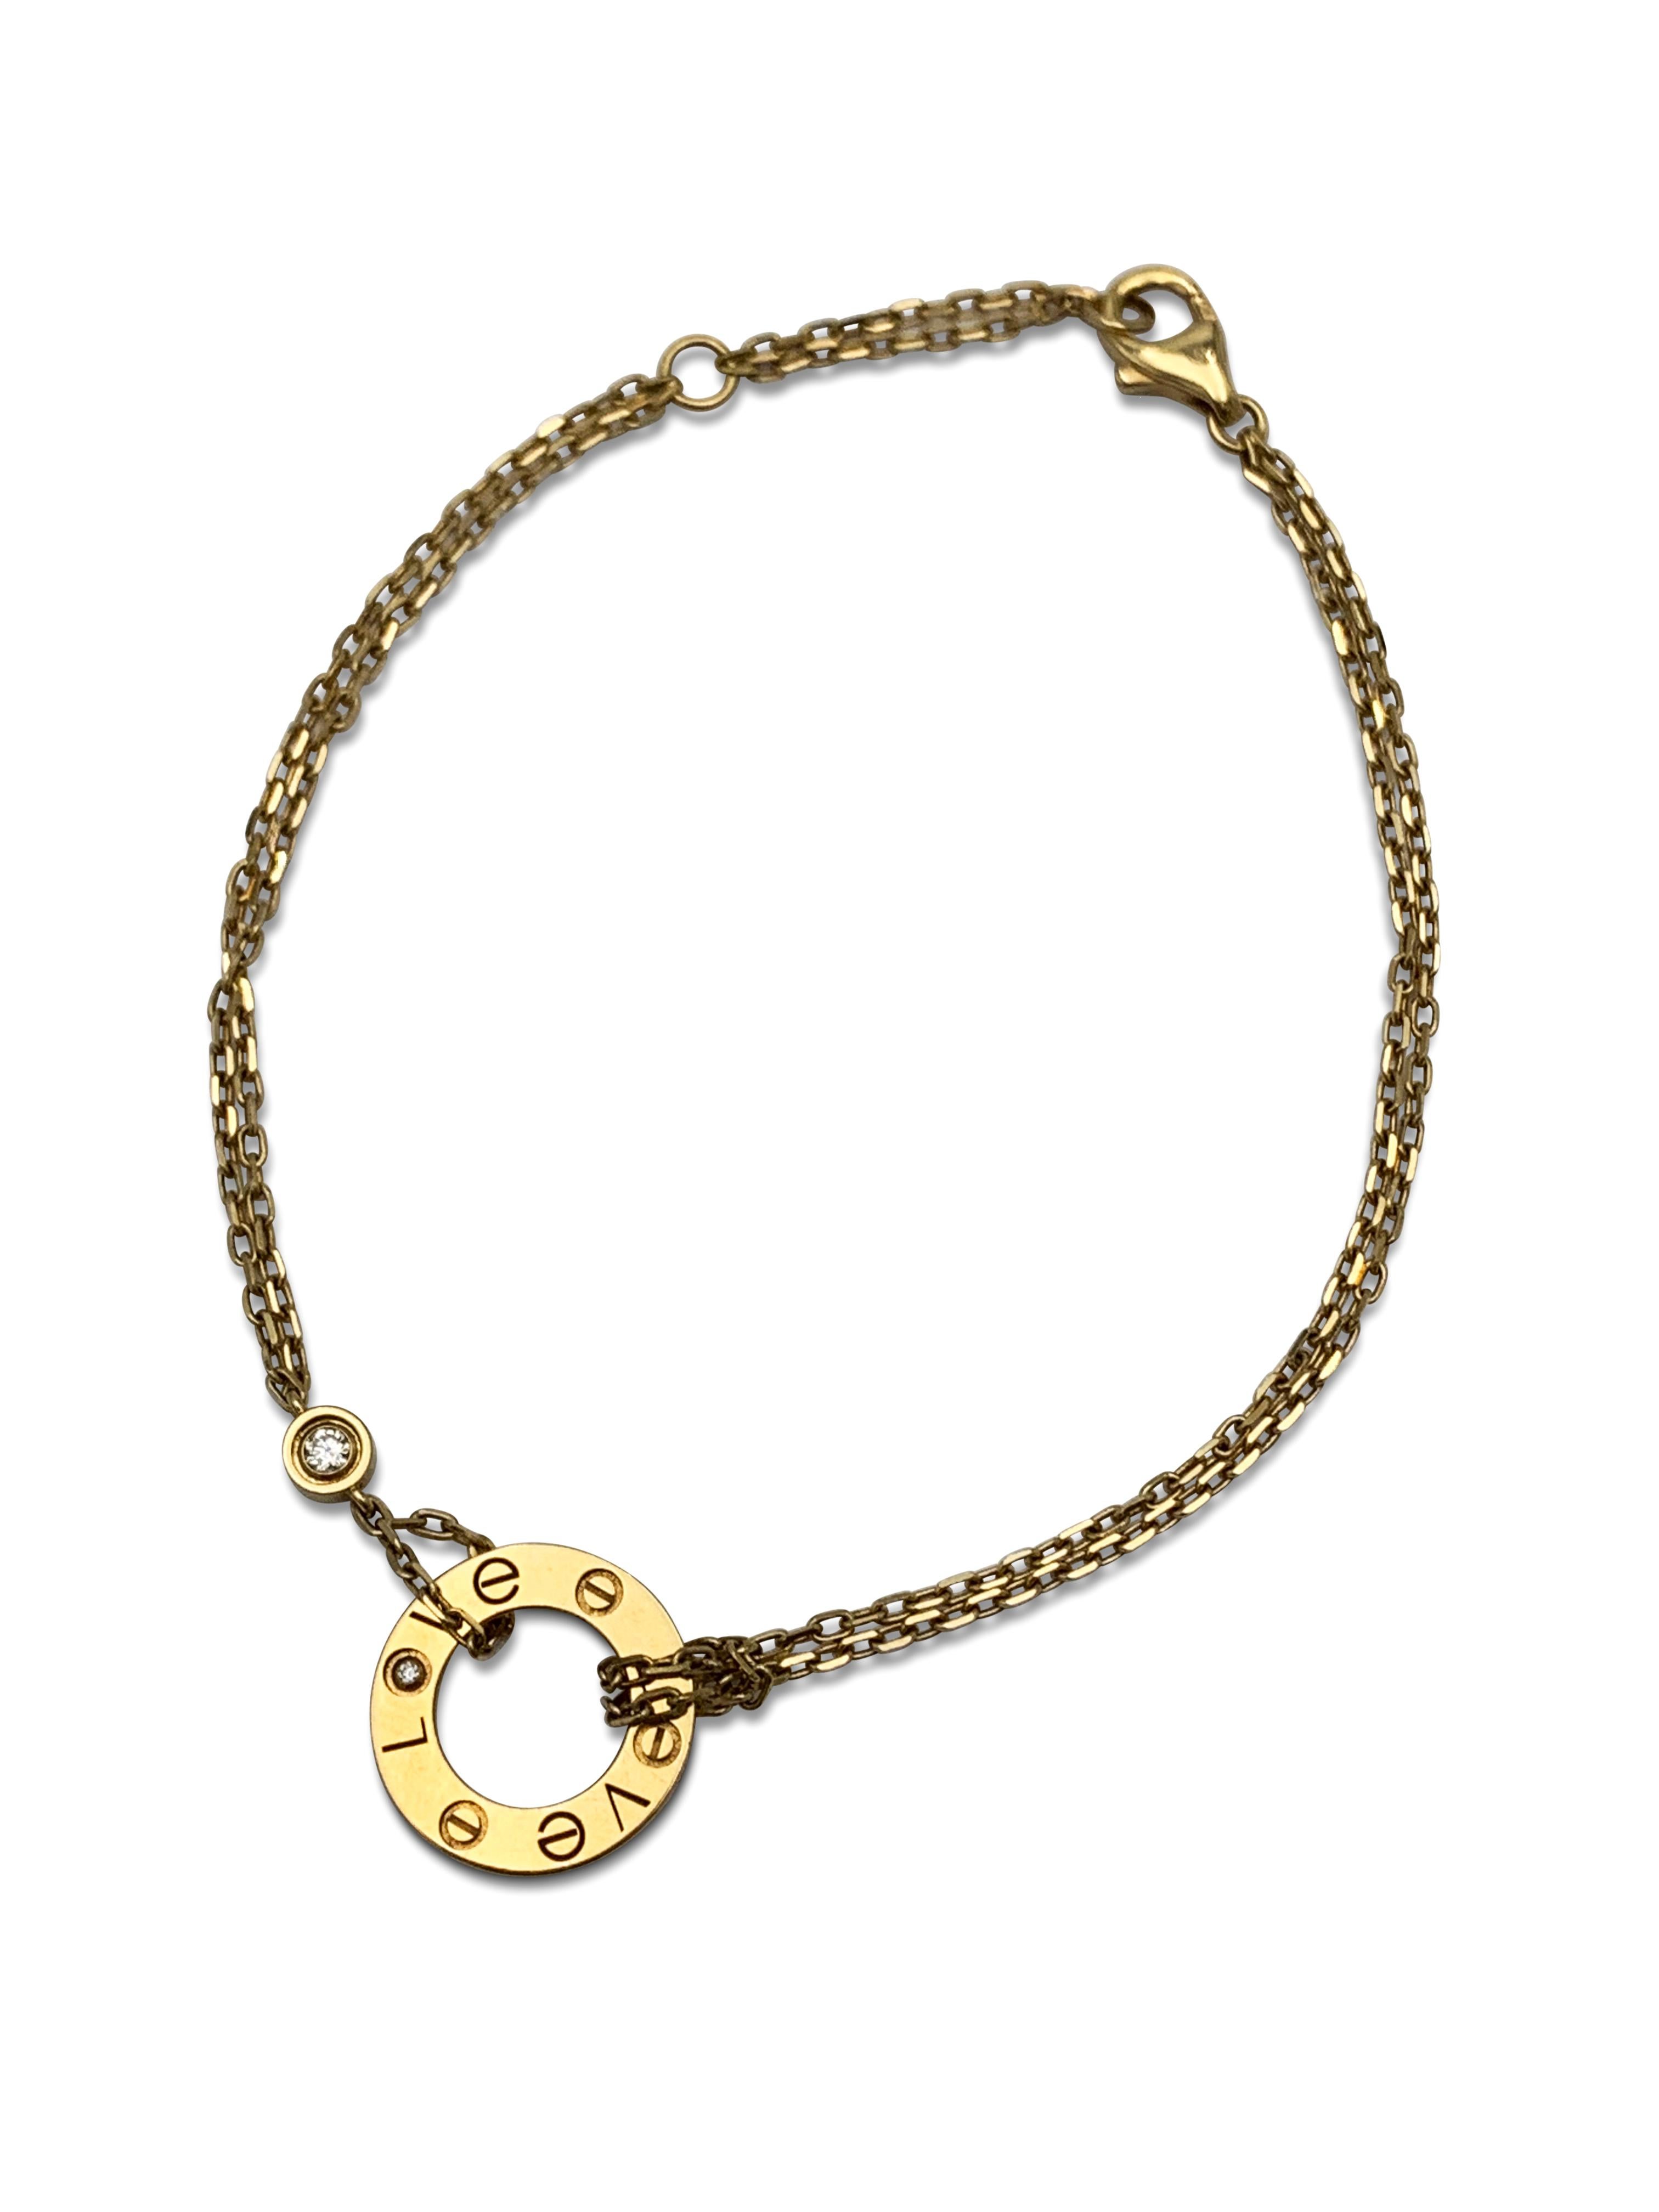 Authentic chain and ring charm bracelet from the Cartier Love collection. Made in 18 karat yellow gold and double strand oval link chain with a half-inch round ring and screw top motifs set with two round brilliant cut diamonds of approximately 0.30